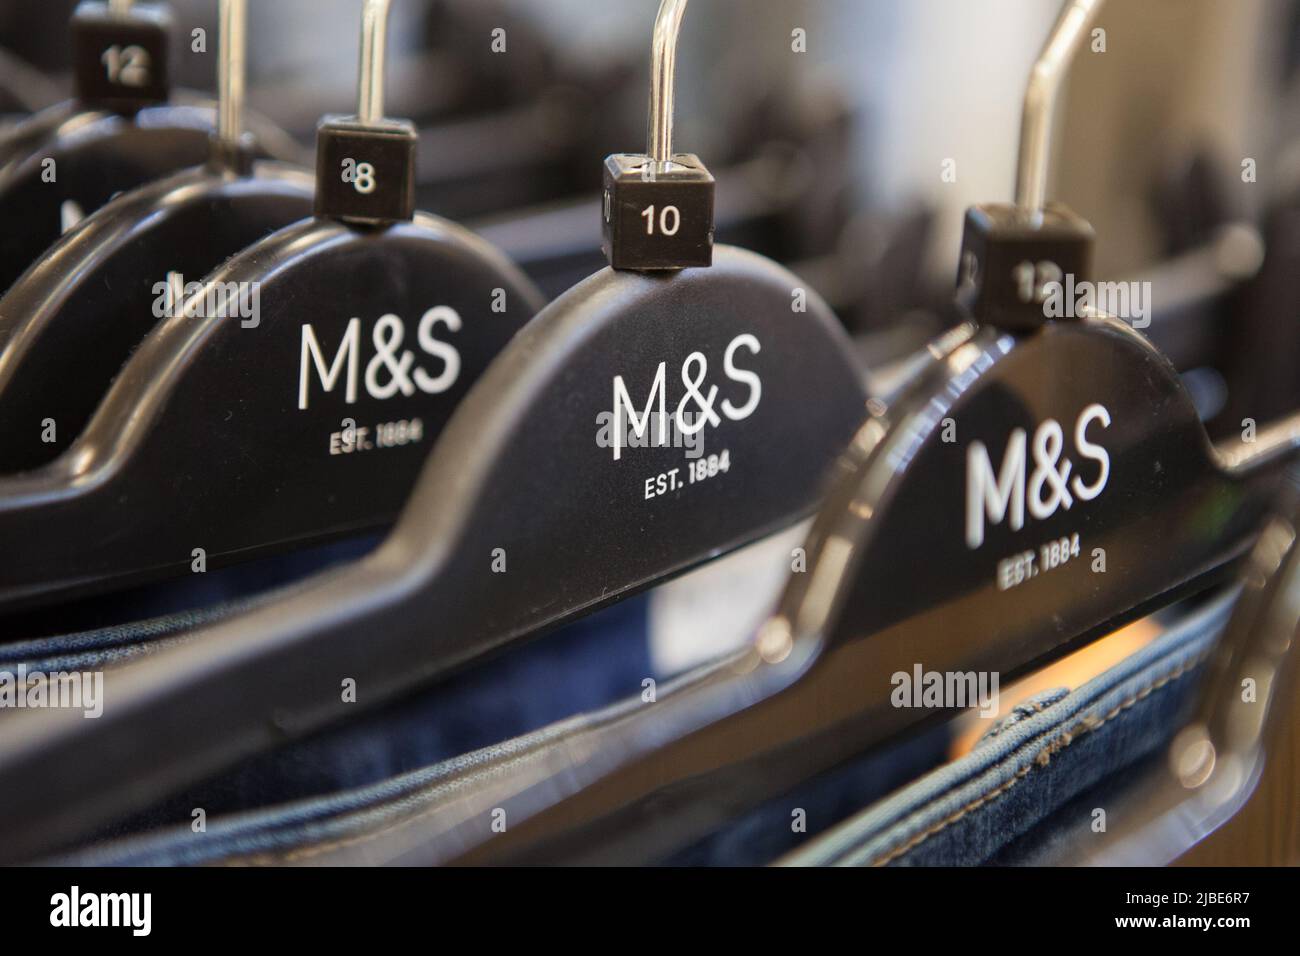 Clothing hangers in a Marks & Spencer store Stock Photo